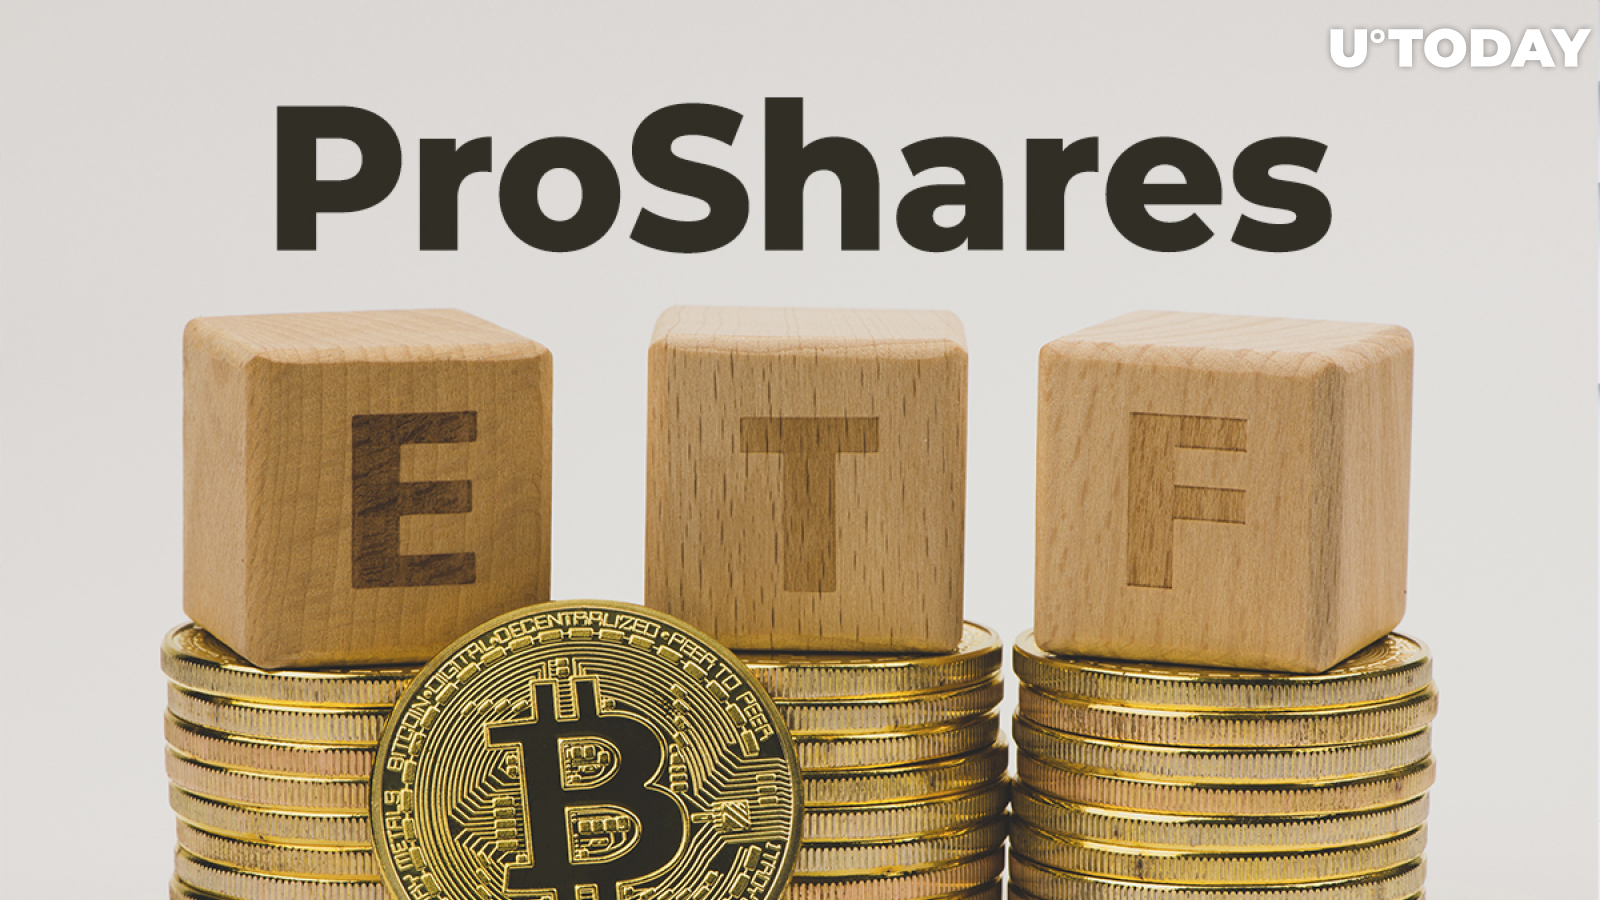 ProShares Bitcoin ETF Reaches Same Net Asset Value as Canadian ETFs in Two Days